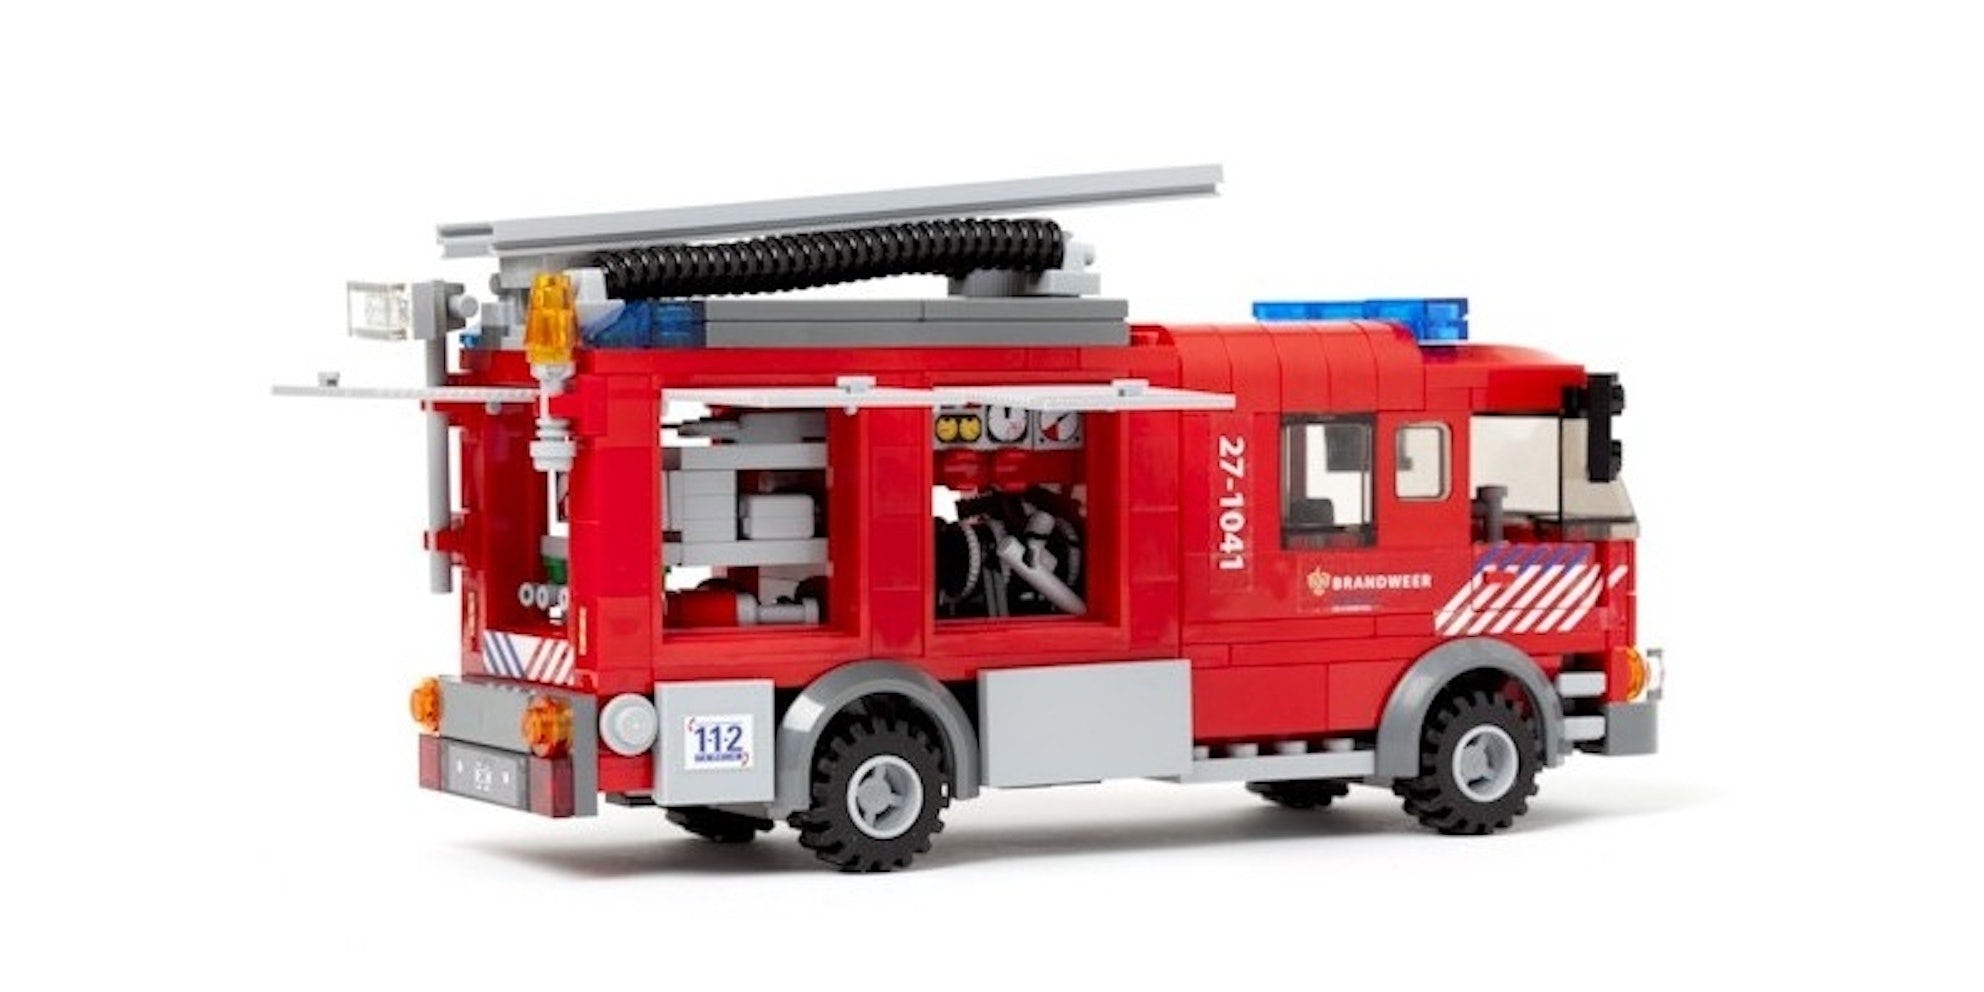 legofire engine truck - Conclusion Consulting